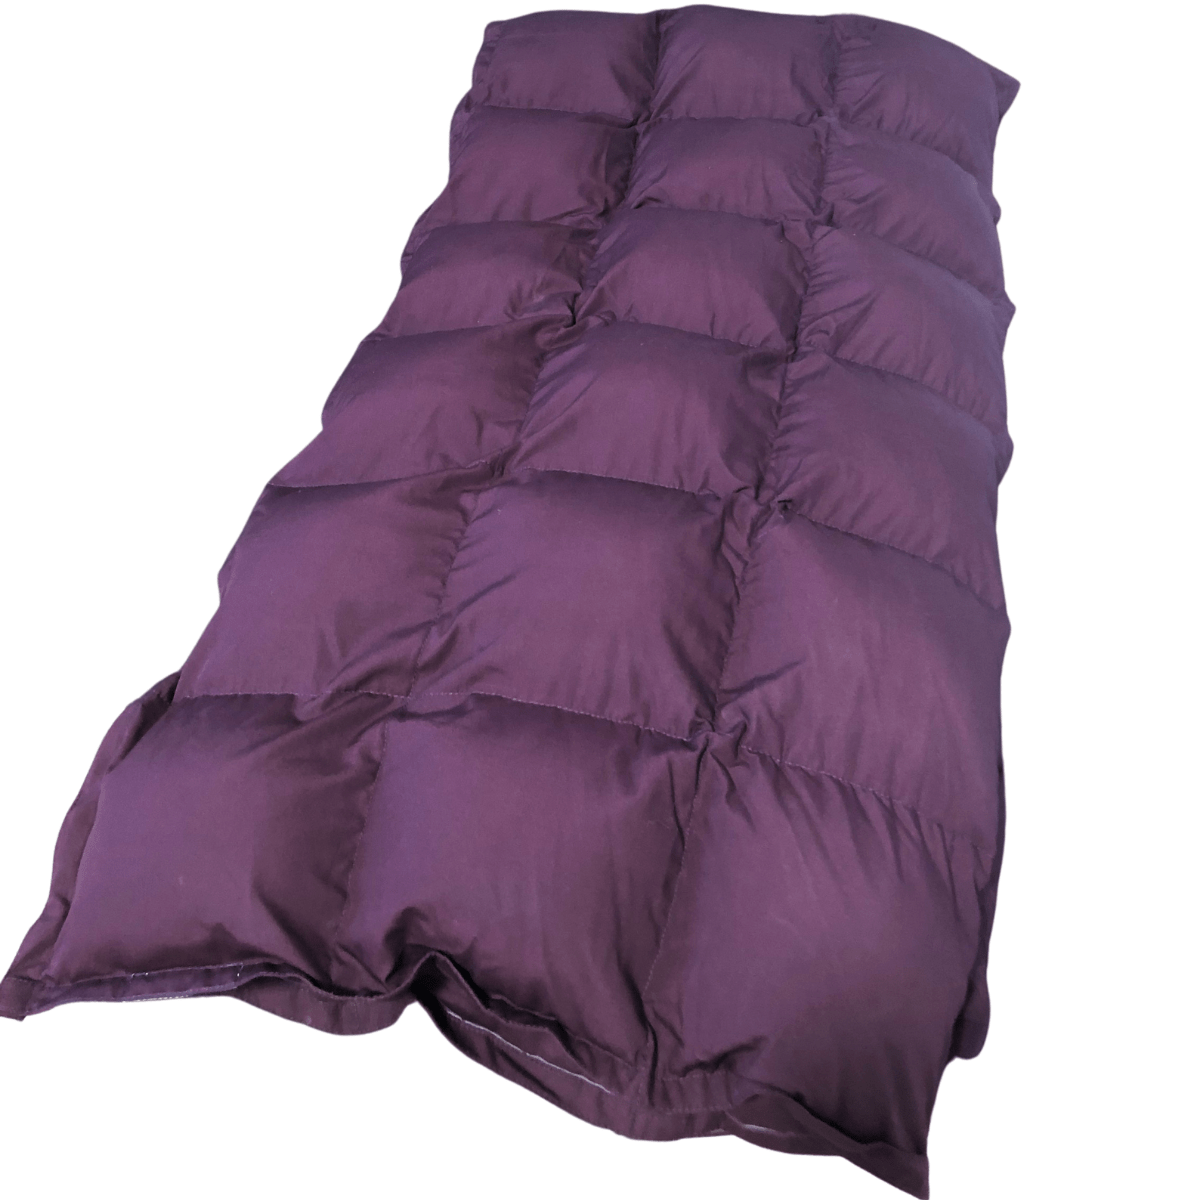 Weighted Blanket - Cabernet Purple